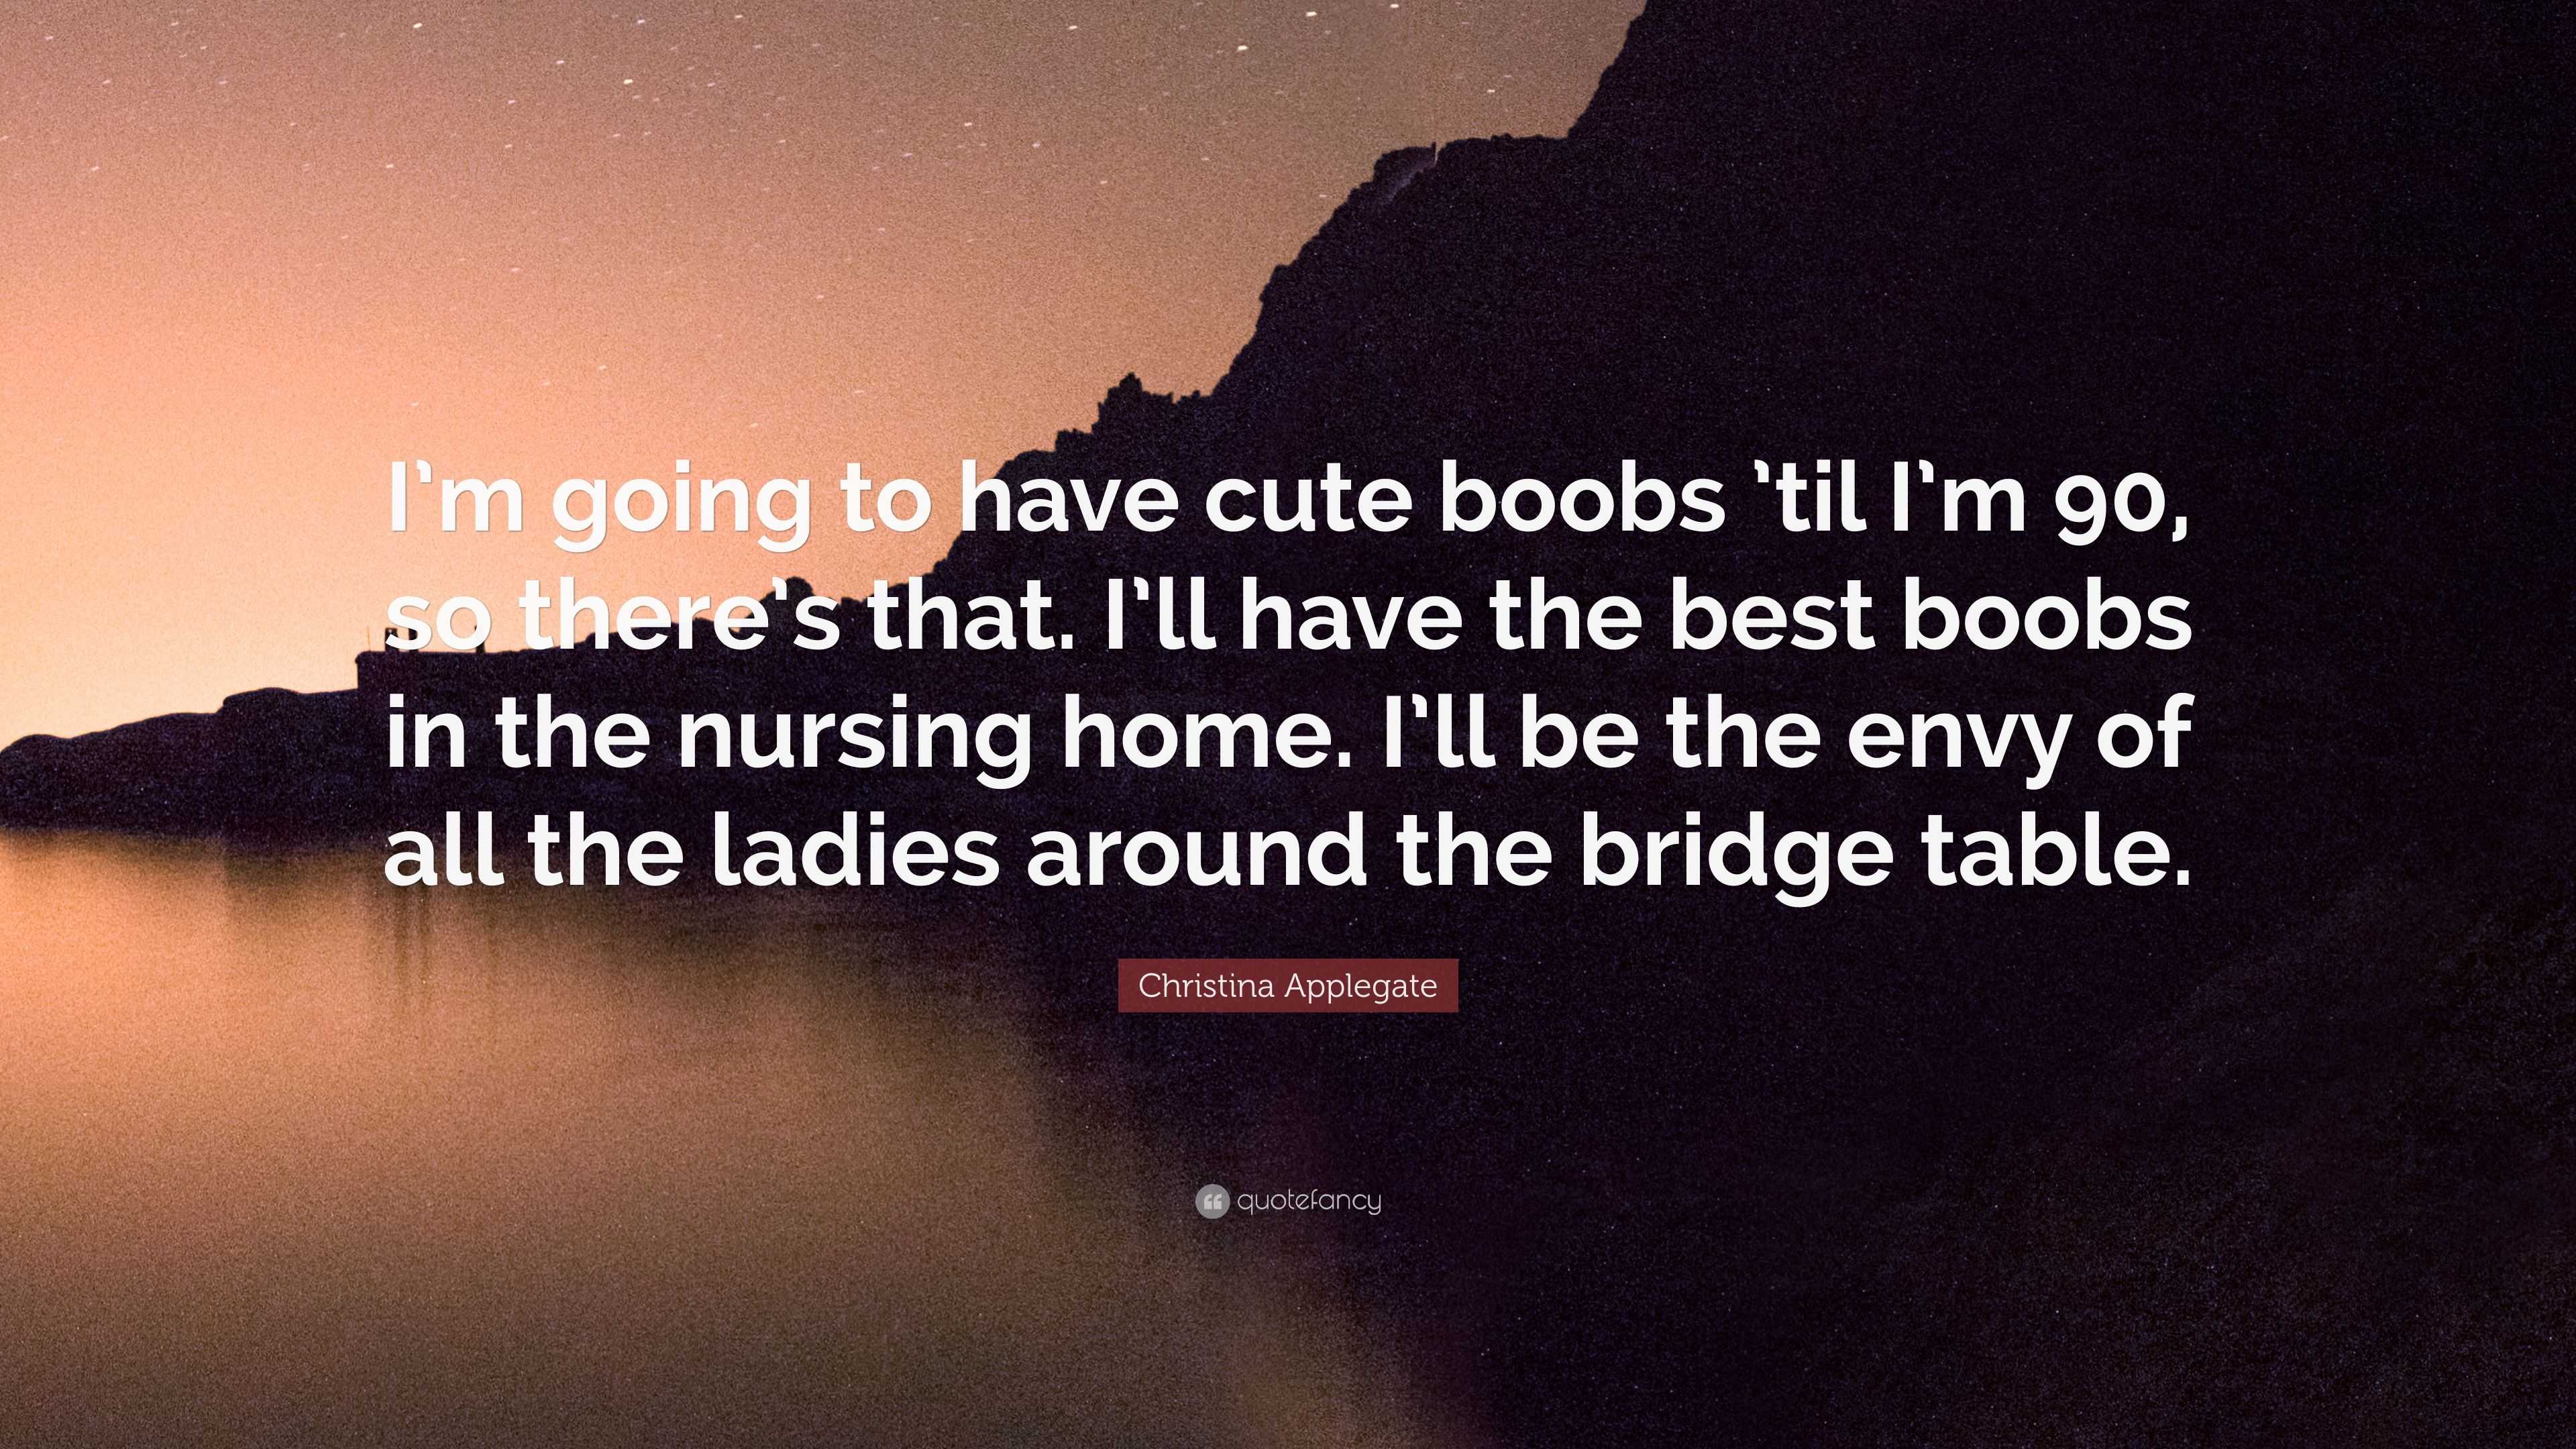 Christina Applegate Quote: “I'm going to have cute boobs 'til I'm 90, so  there's that. I'll have the best boobs in the nursing home. I'll be the  env”